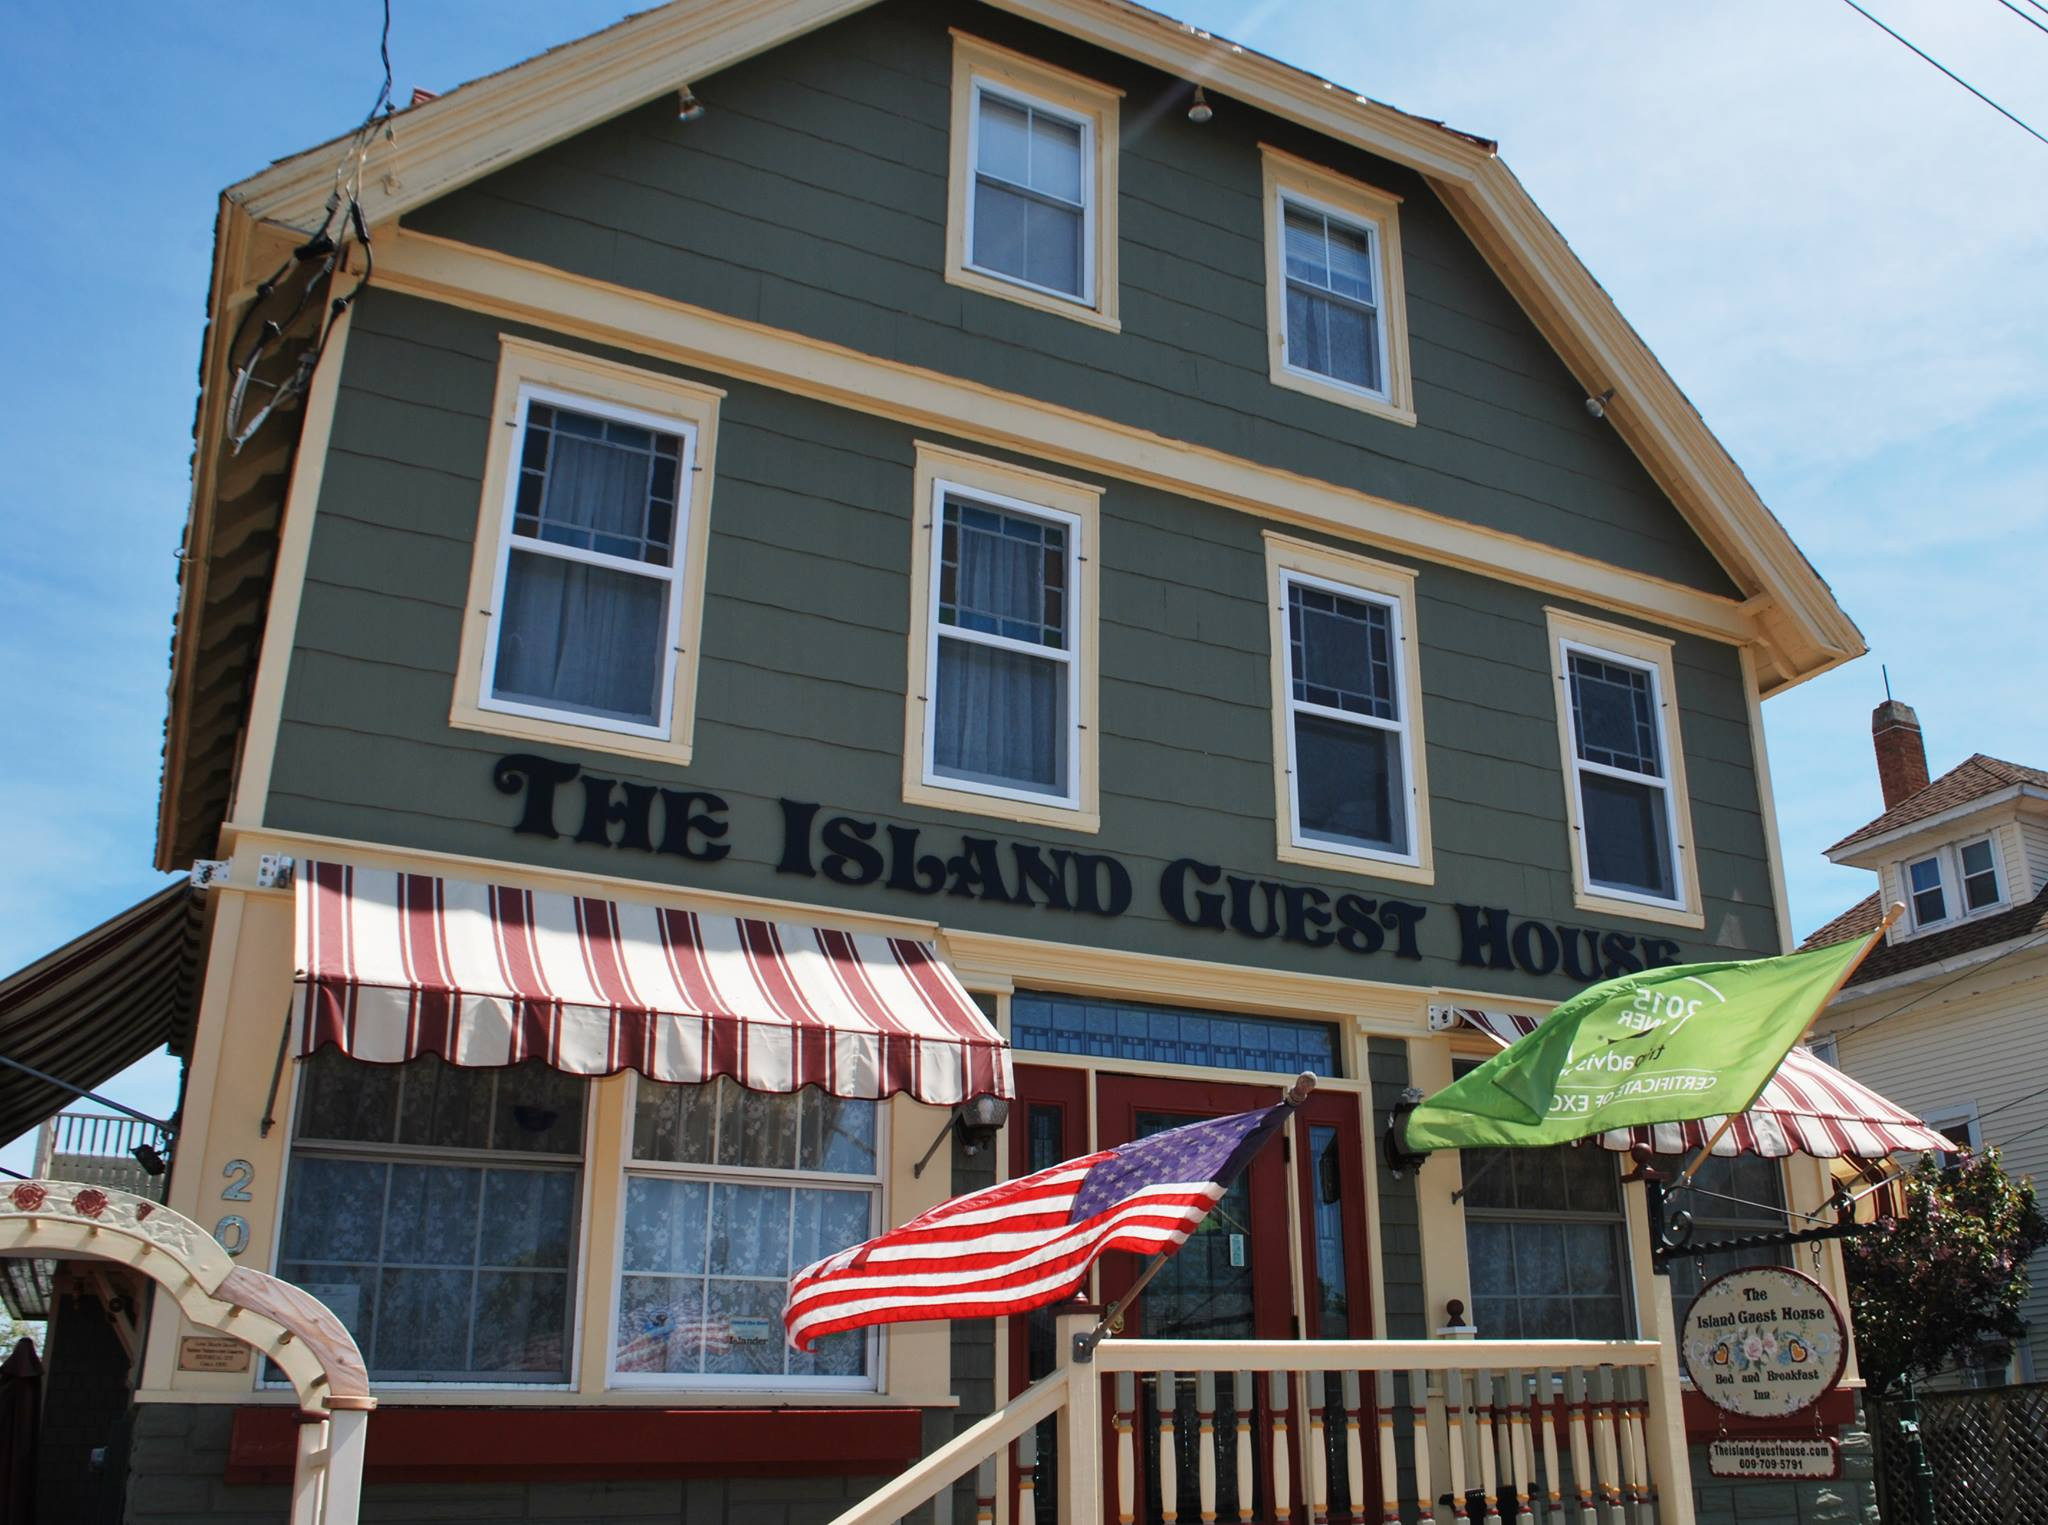 Pet Friendly Island Guest House Bed and Breakfast Inn in Beach Haven, New Jersey